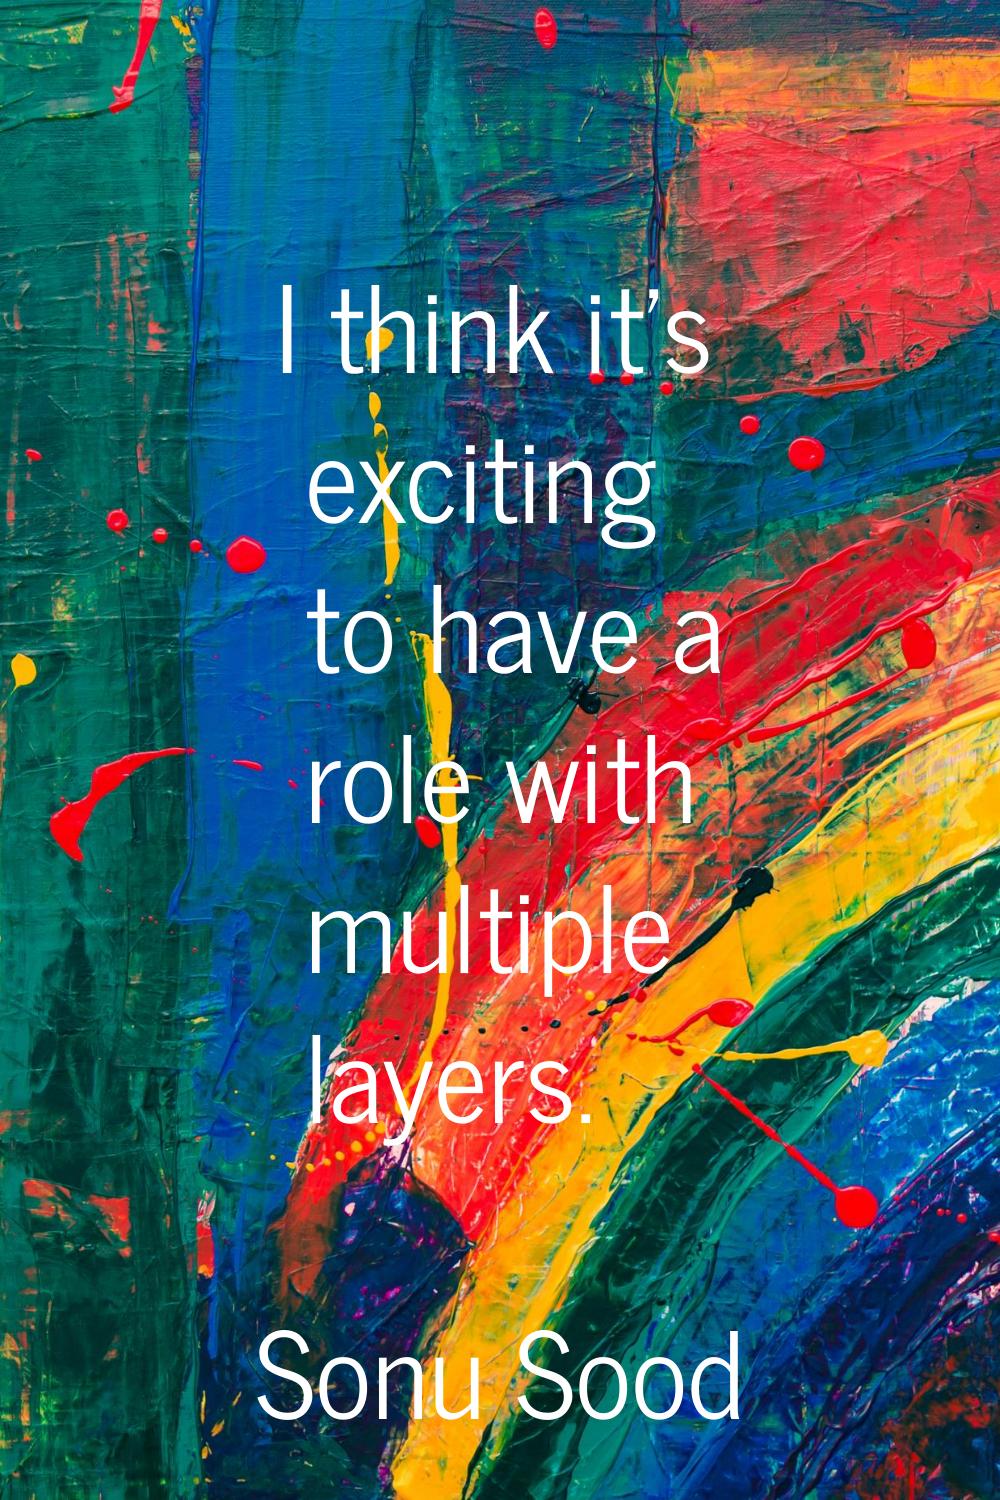 I think it's exciting to have a role with multiple layers.